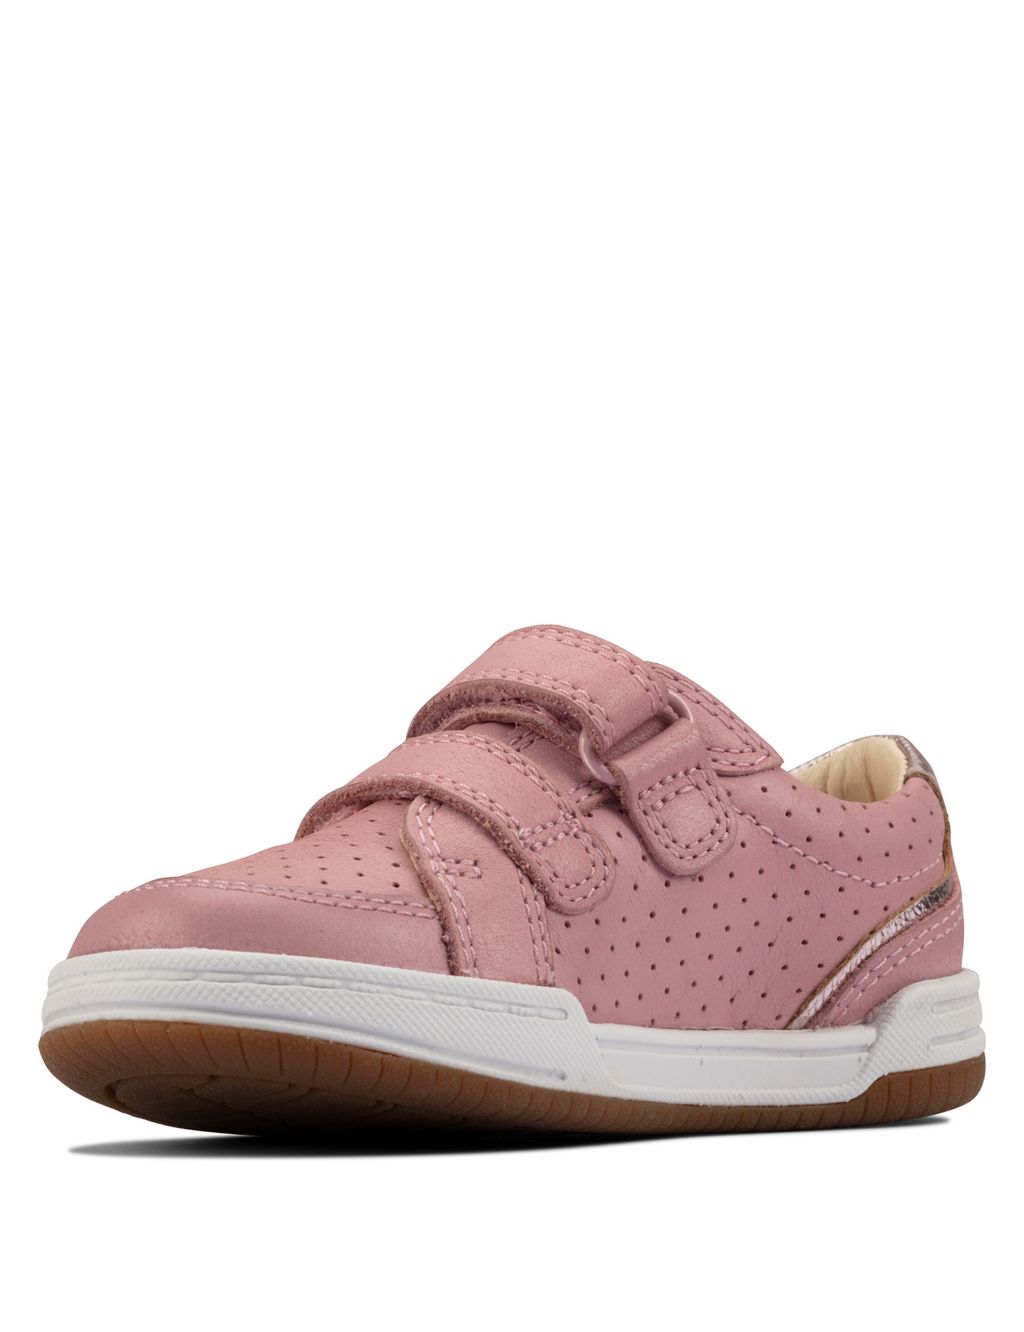 Baby Leather Riptape Trainers (Toddler size 4-9.5) image 5